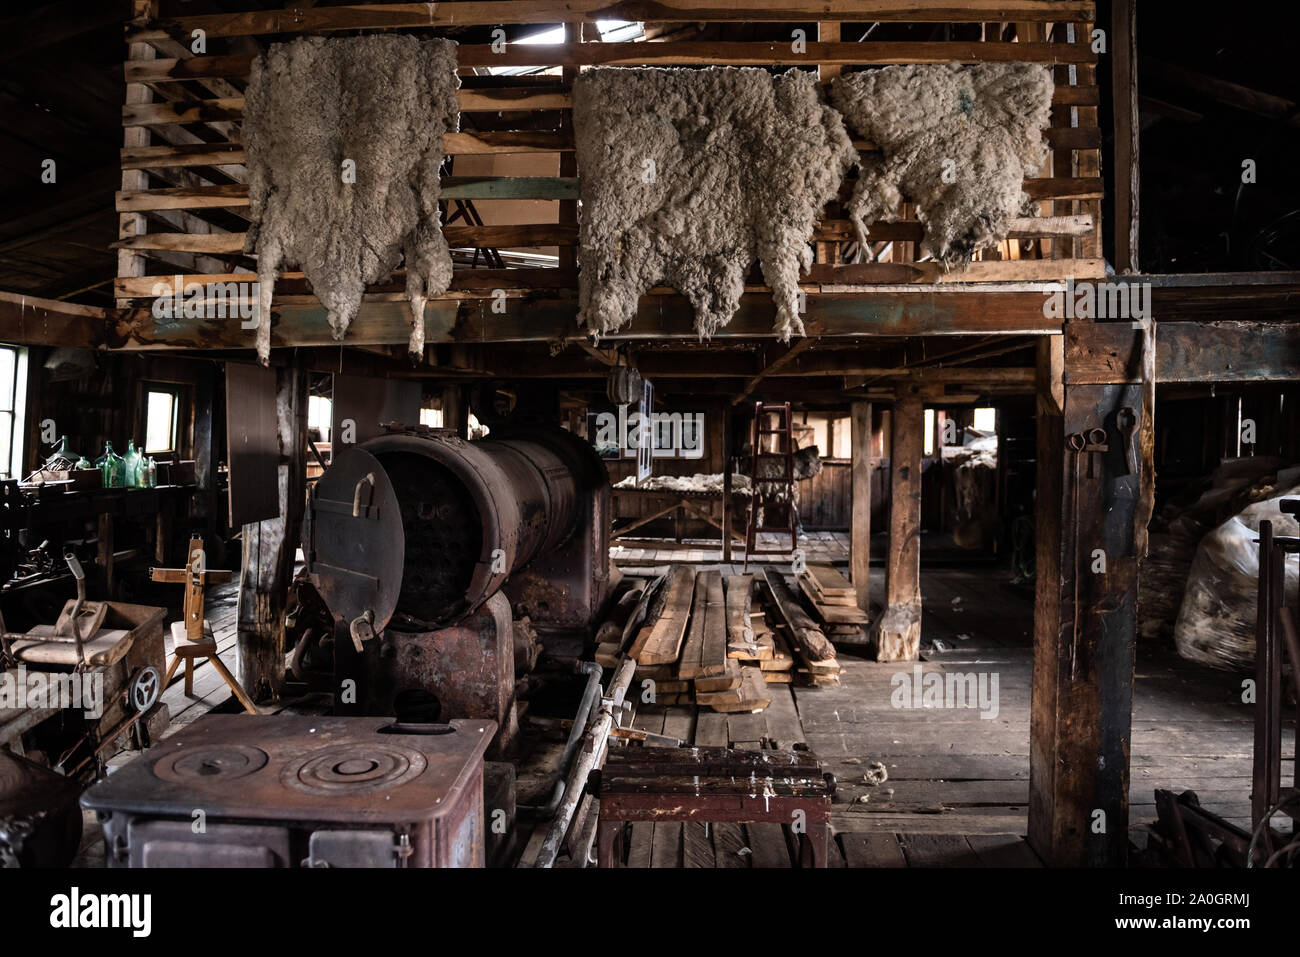 Elements and machinery used to shear sheep at the beginning of the 20th century Stock Photo